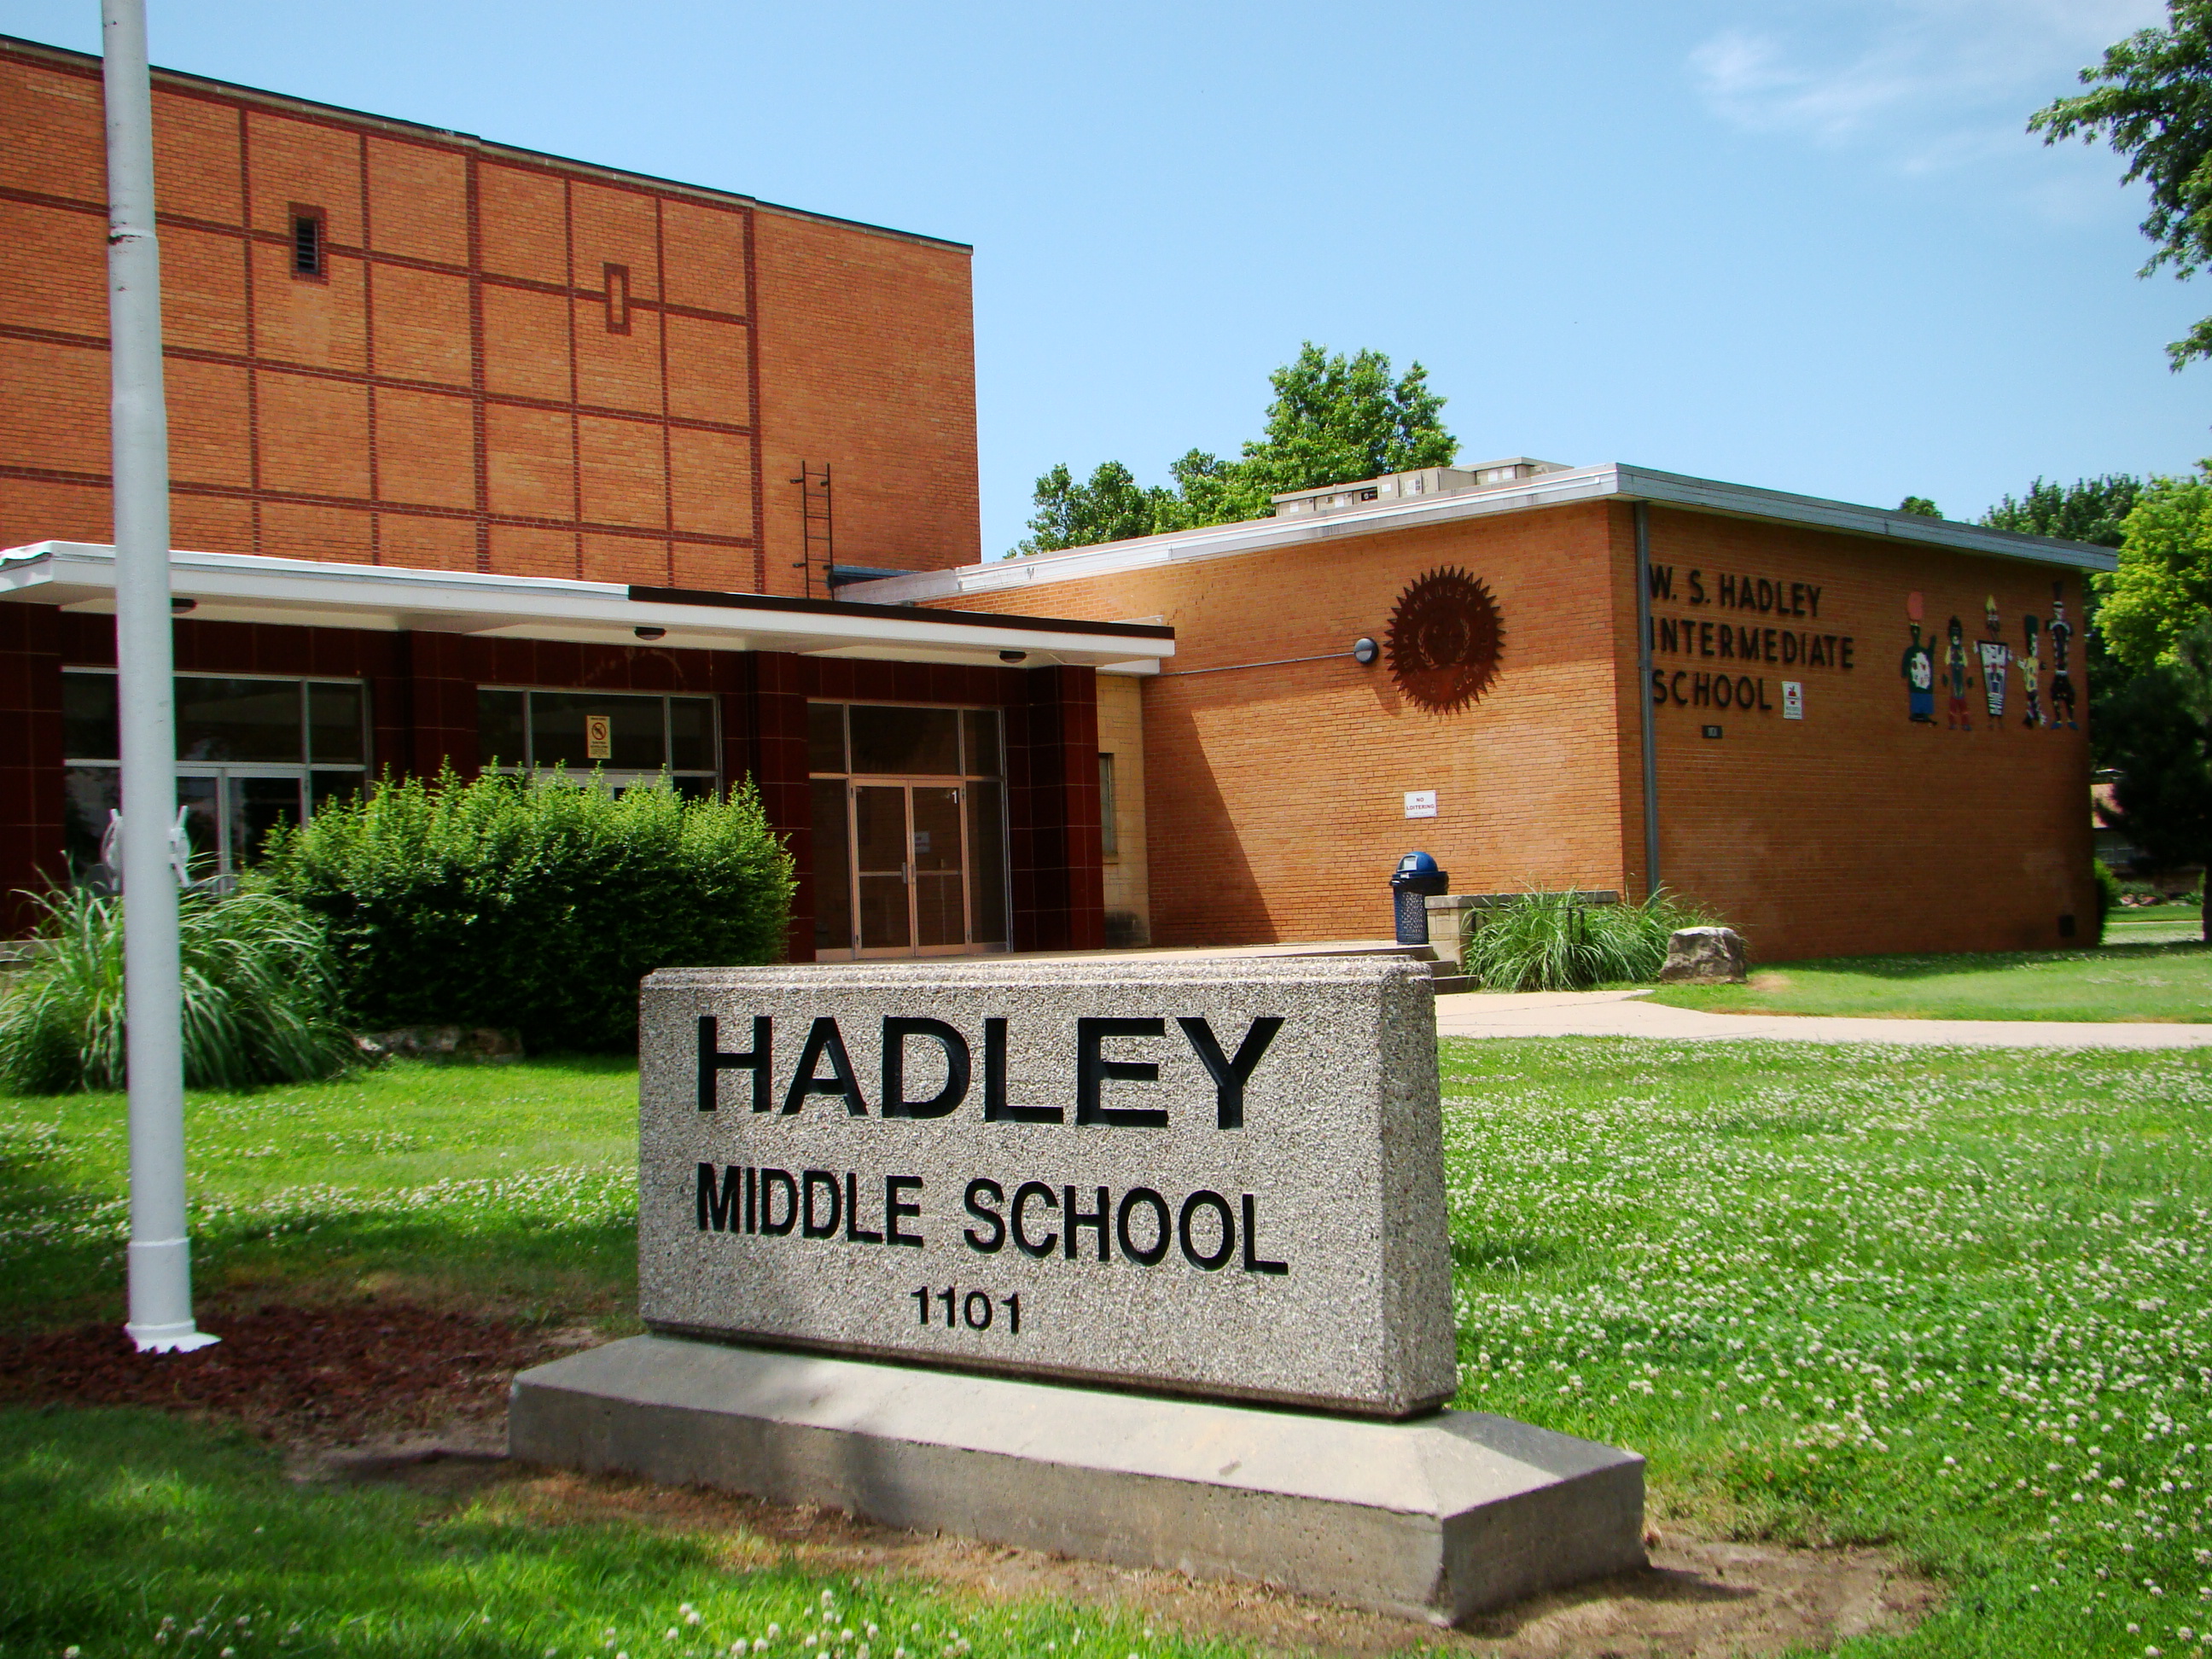 Image of the front of Hadley Middle School